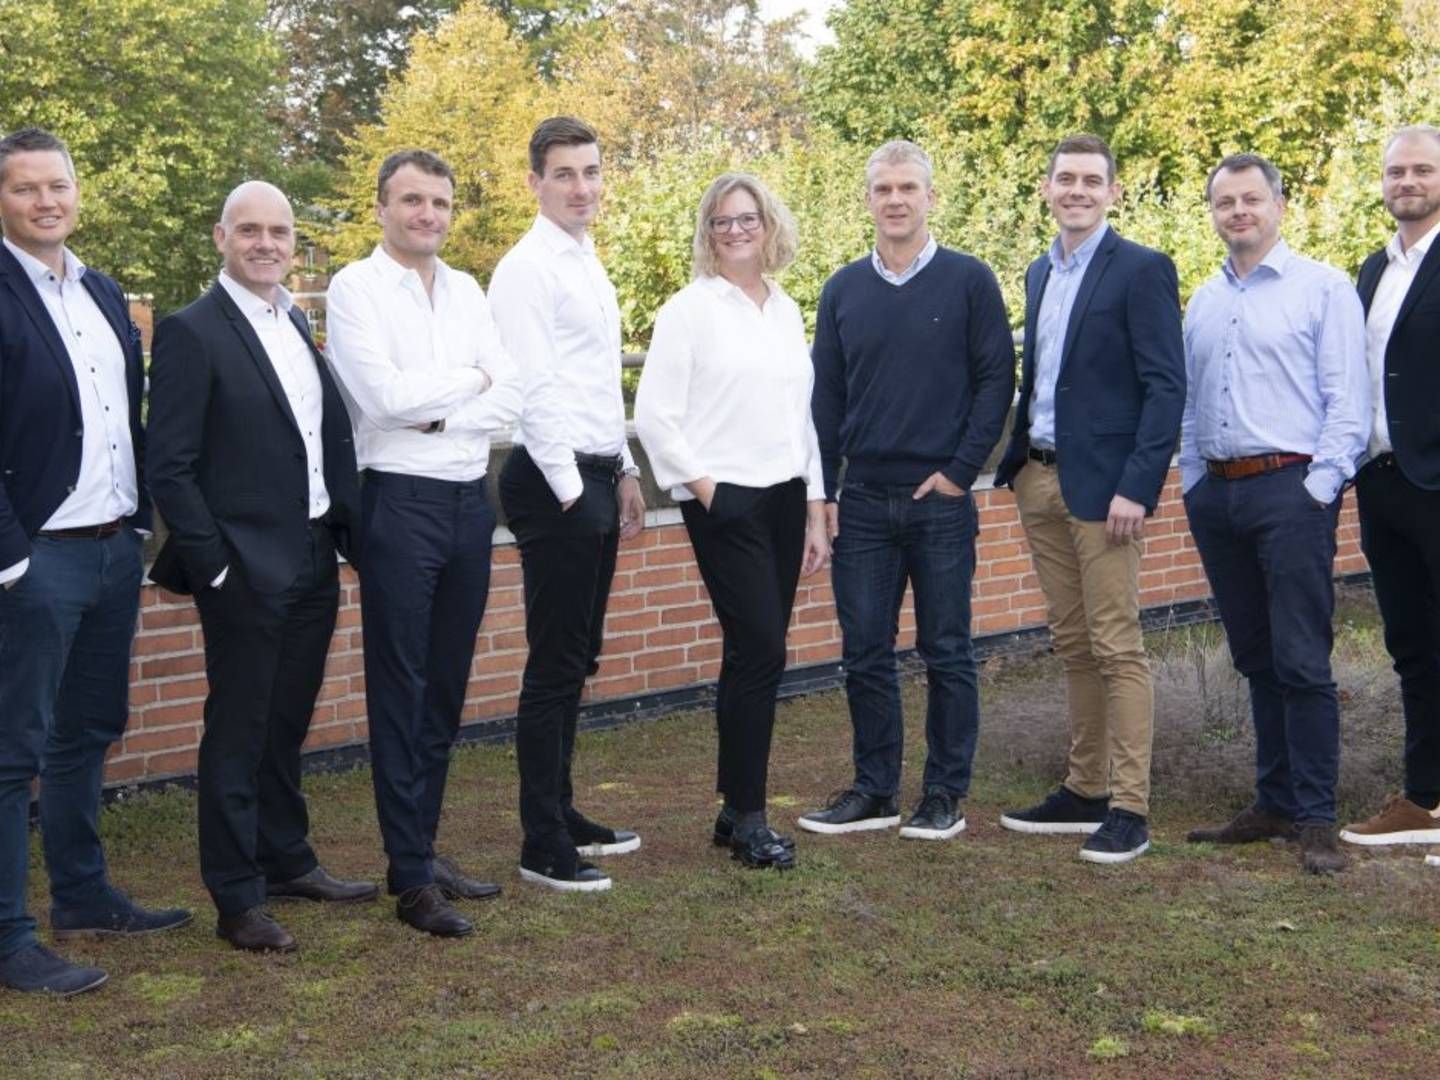 Since the picture was taken, Union Bulk has brought yet another employee on board, now counting a total of ten. A foreign office could be underway as well, states partner Anders Svarrer (third from the left). | Photo: Union Bulk